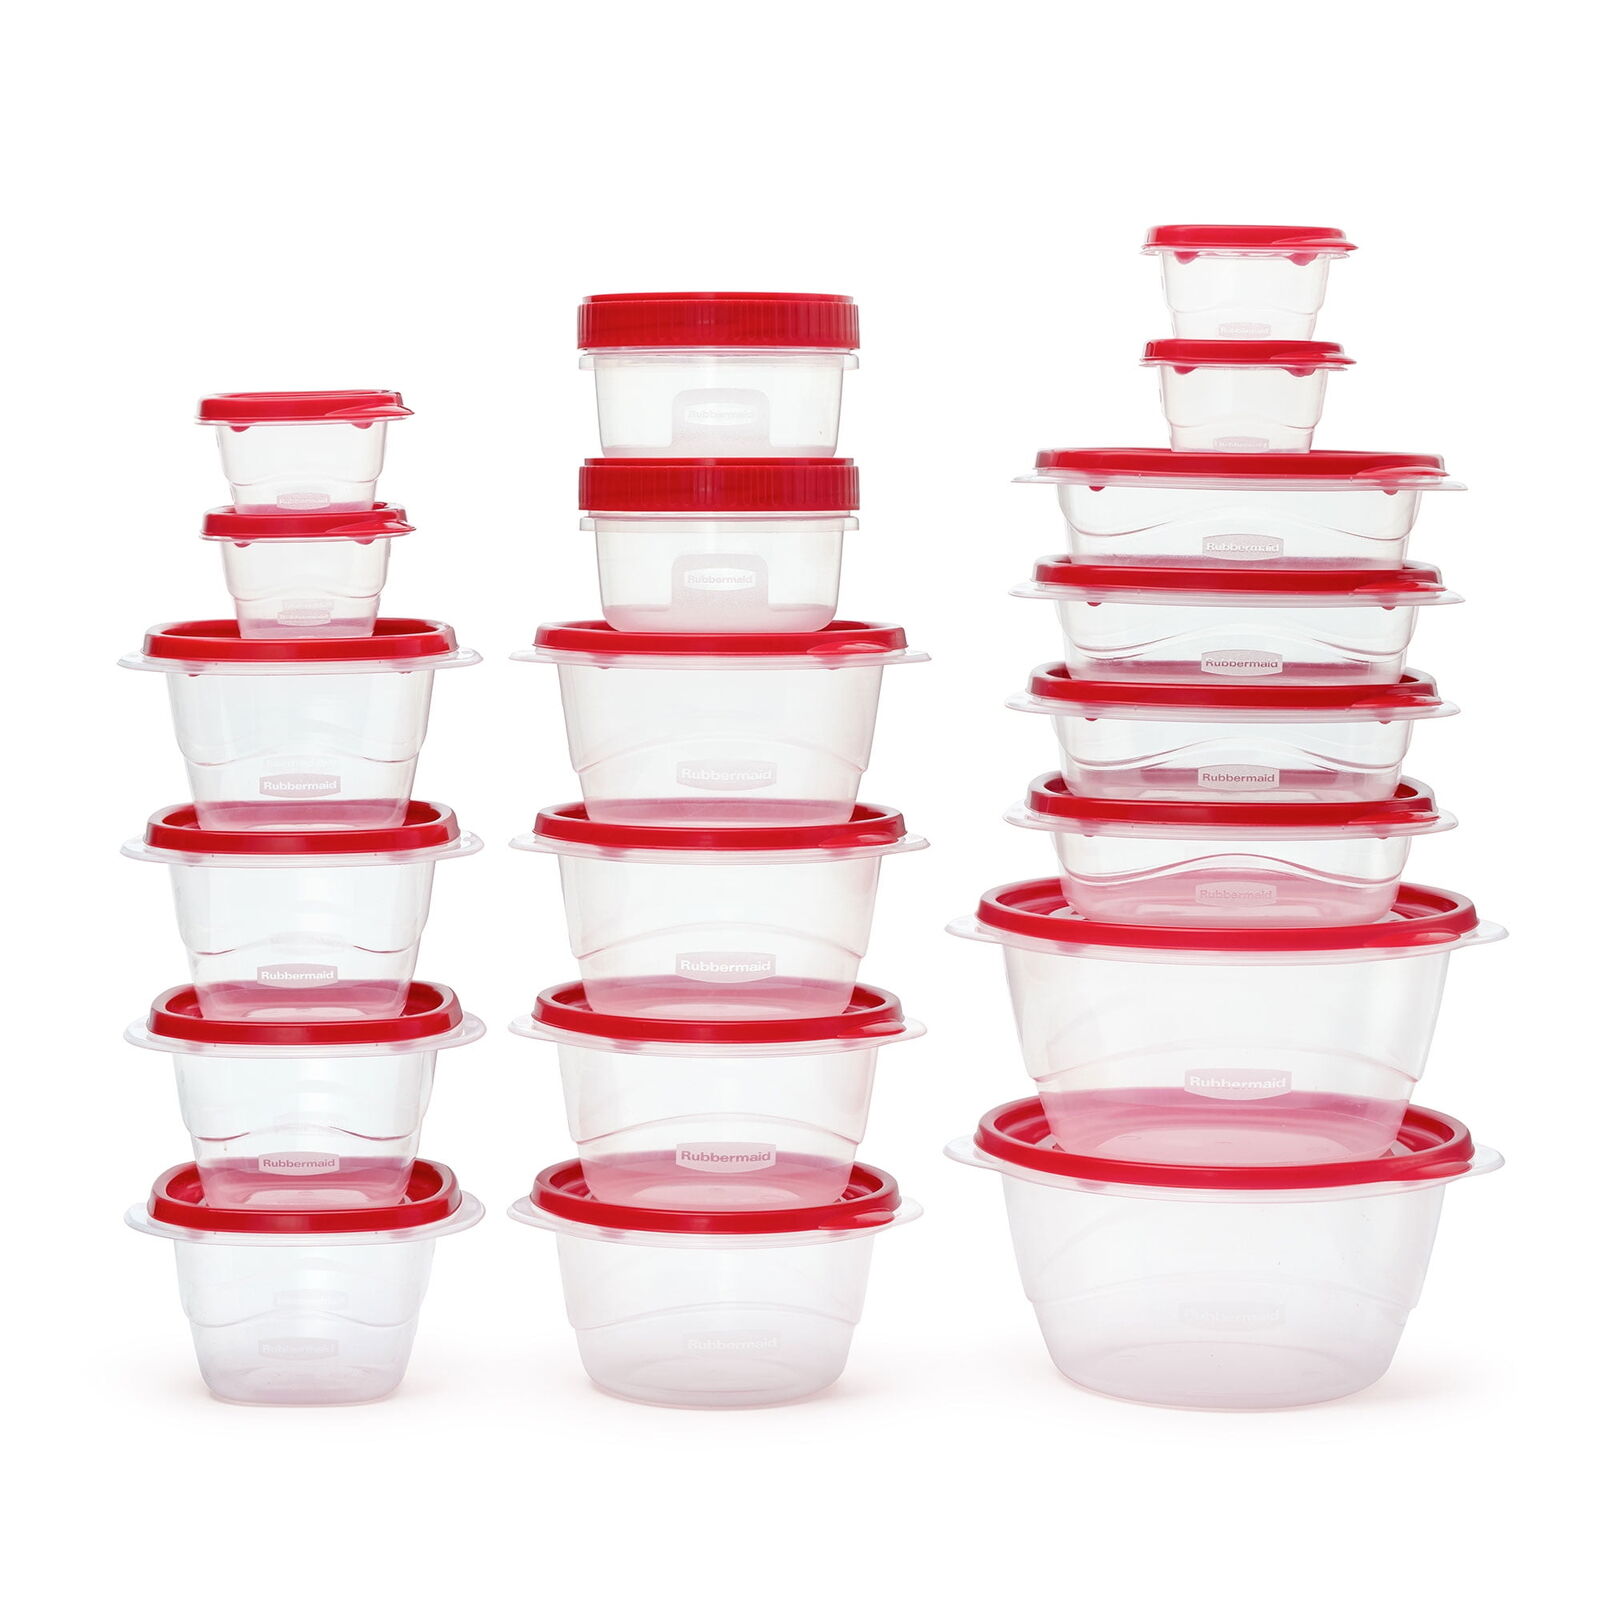 Rubbermaid TakeAlongs 40 Piece Food Storage Set Leakproof Containers Set Red